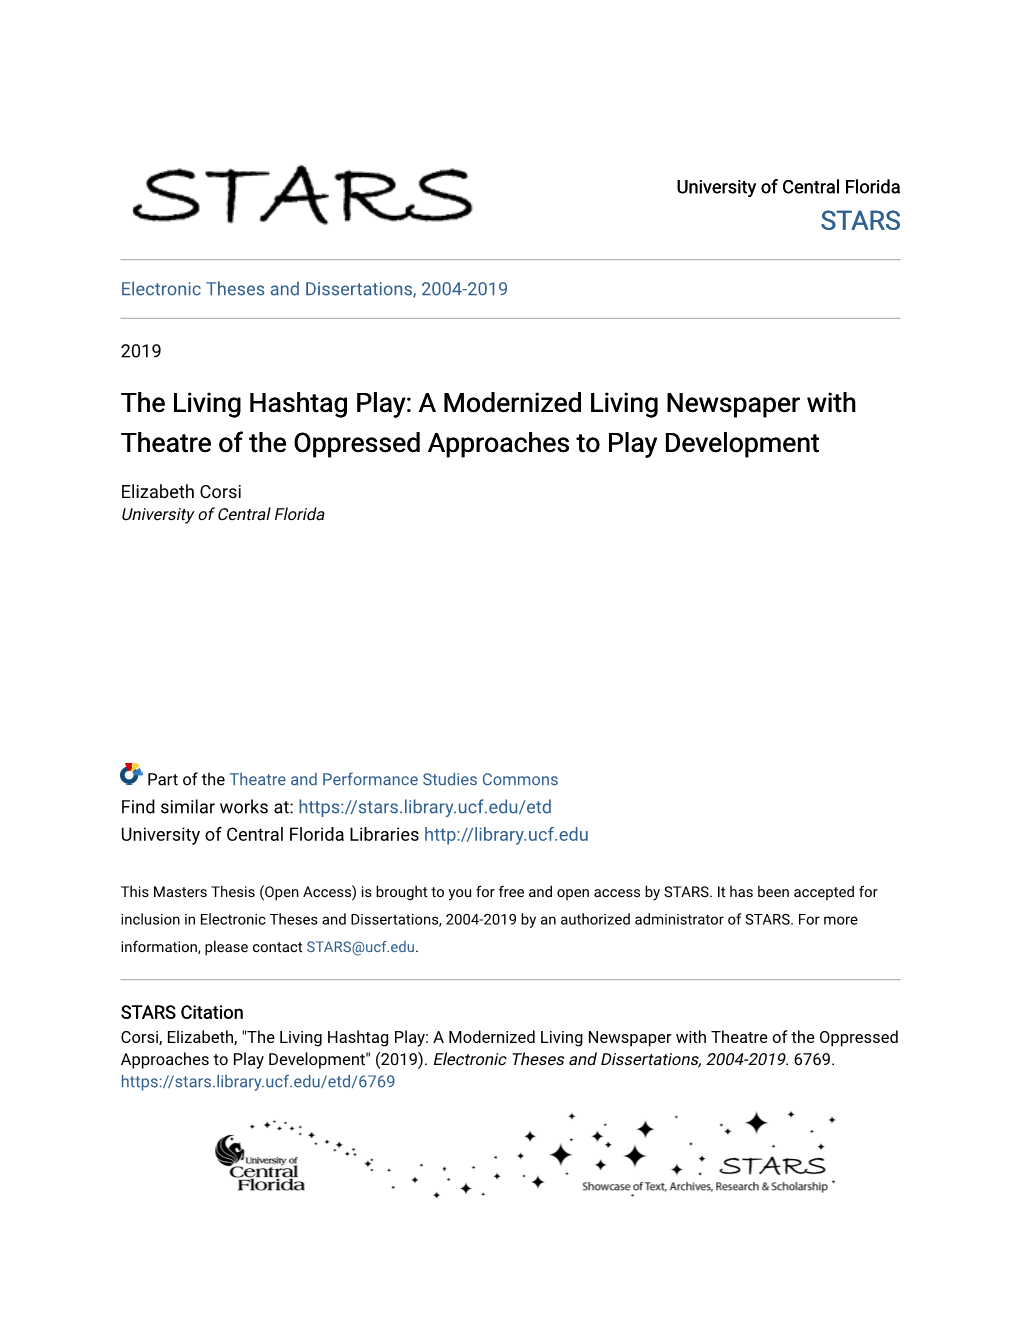 A Modernized Living Newspaper with Theatre of the Oppressed Approaches to Play Development